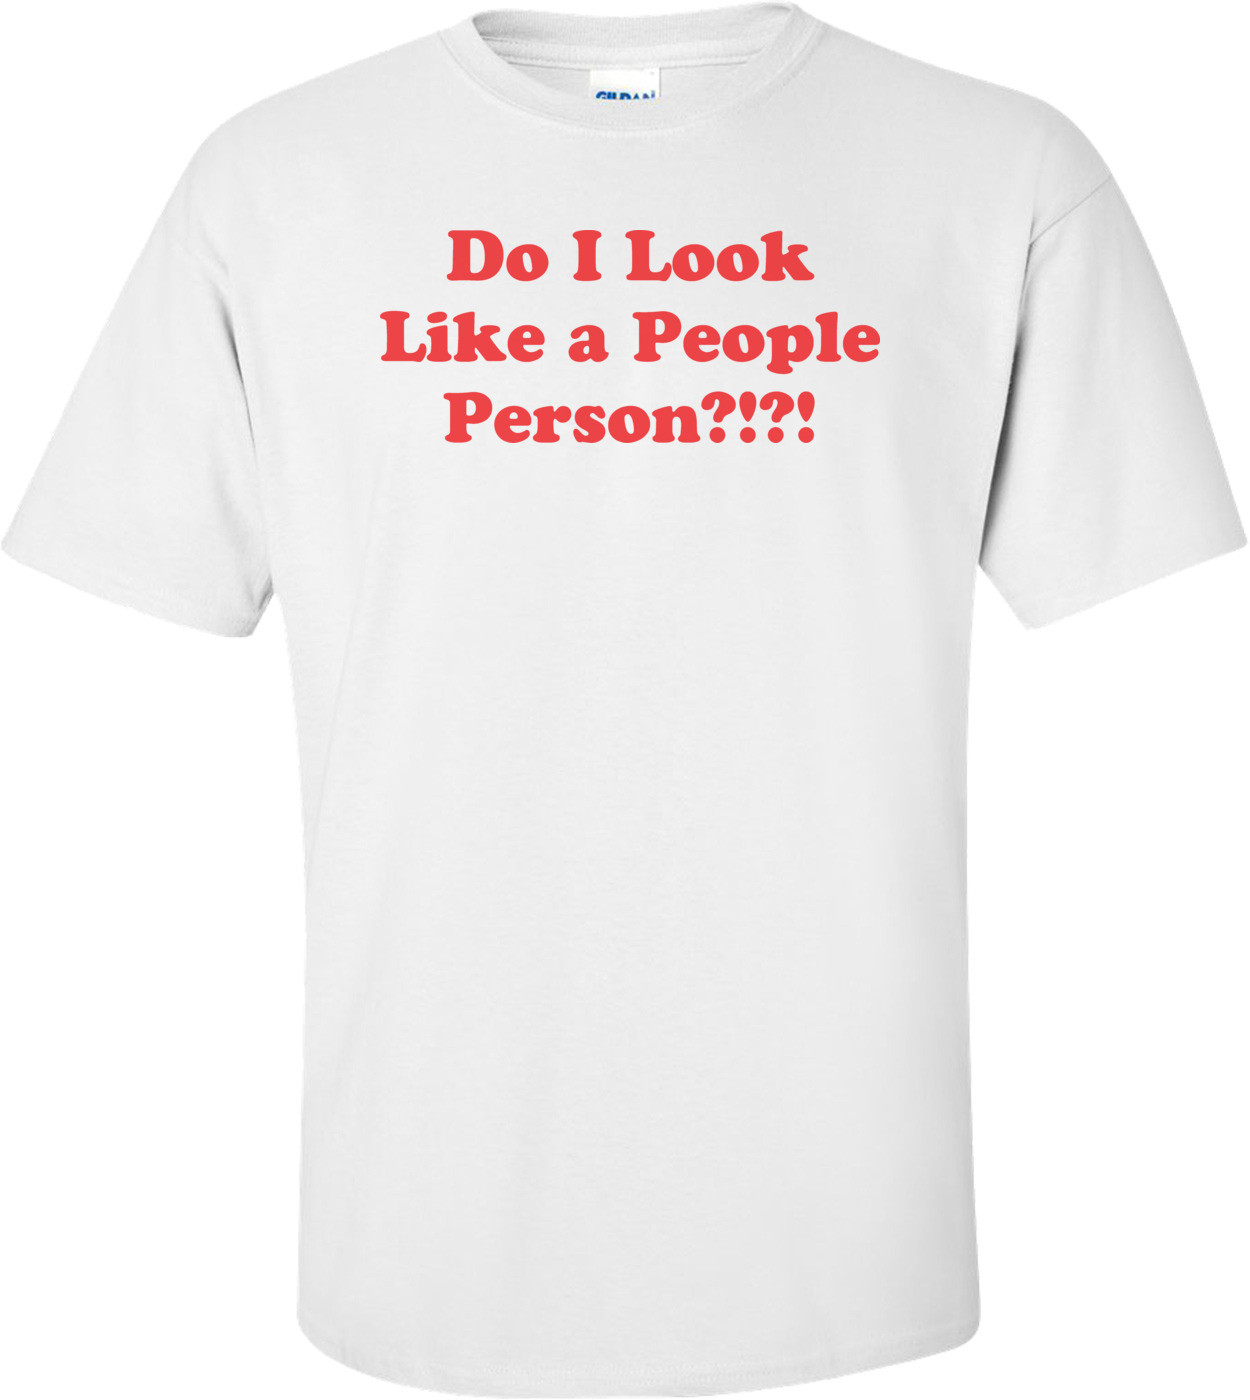 Do I Look Like A People Person?!?! Funny T-shirt